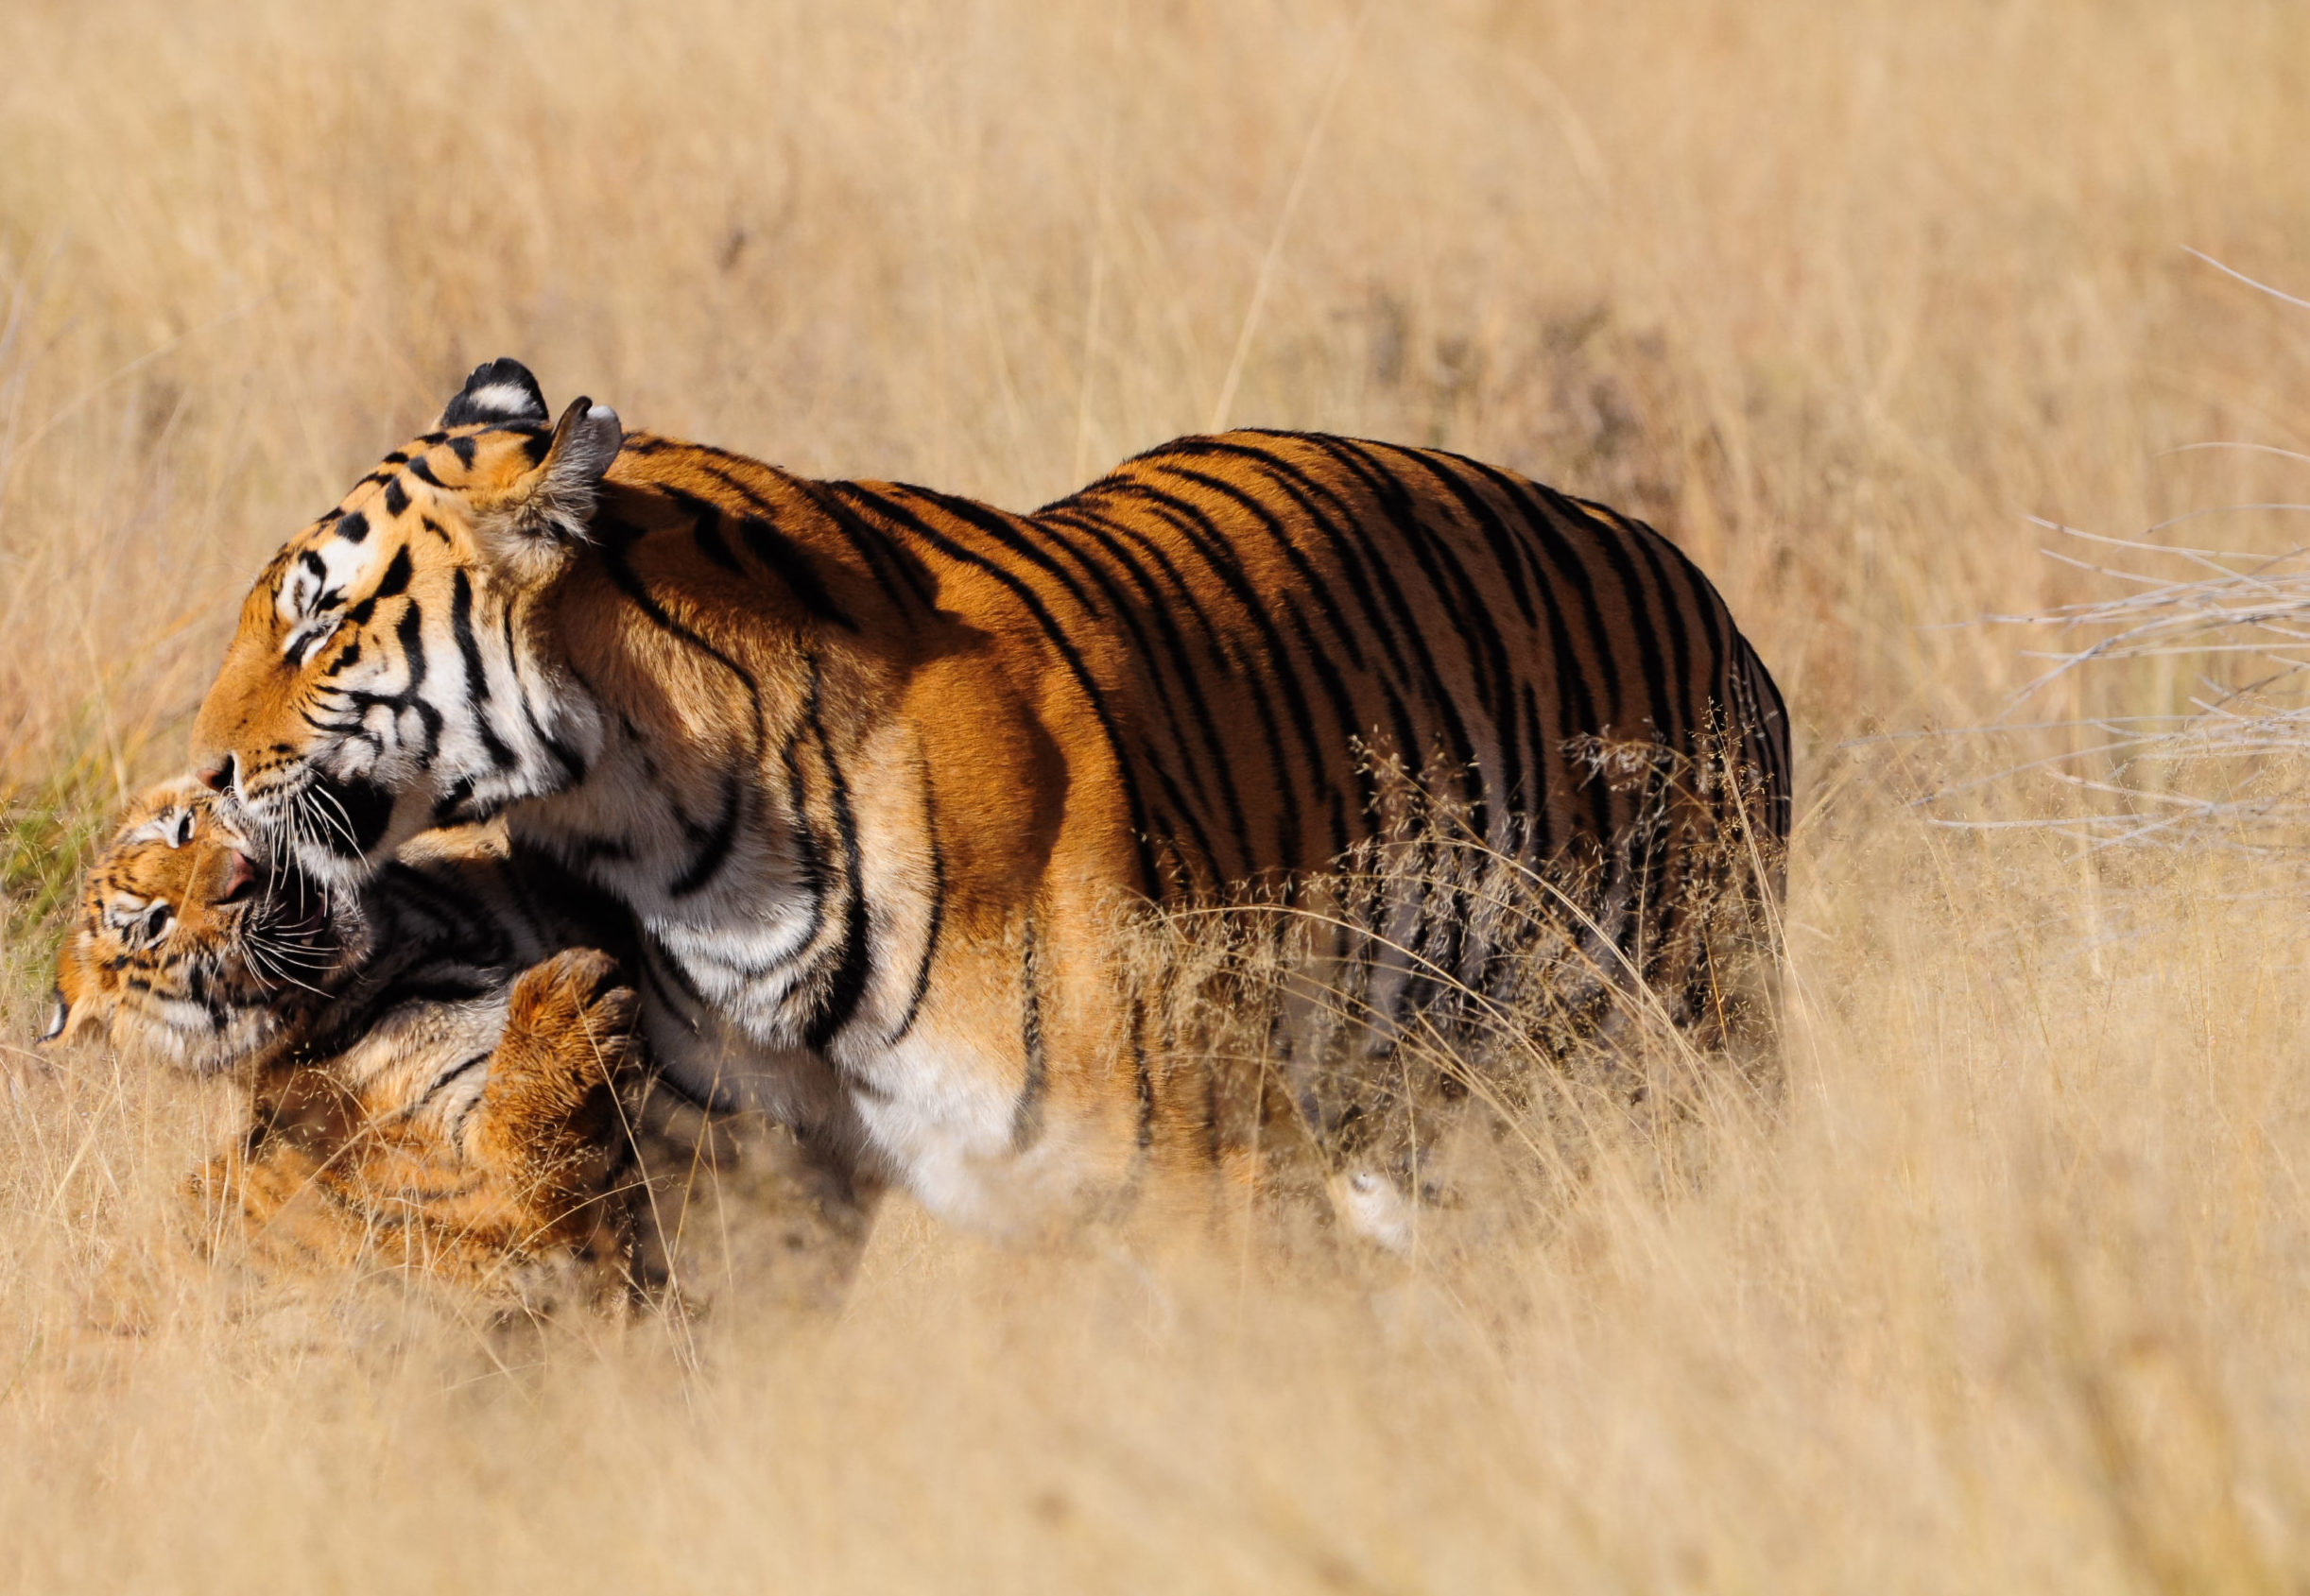 Tiger and cub in long grass